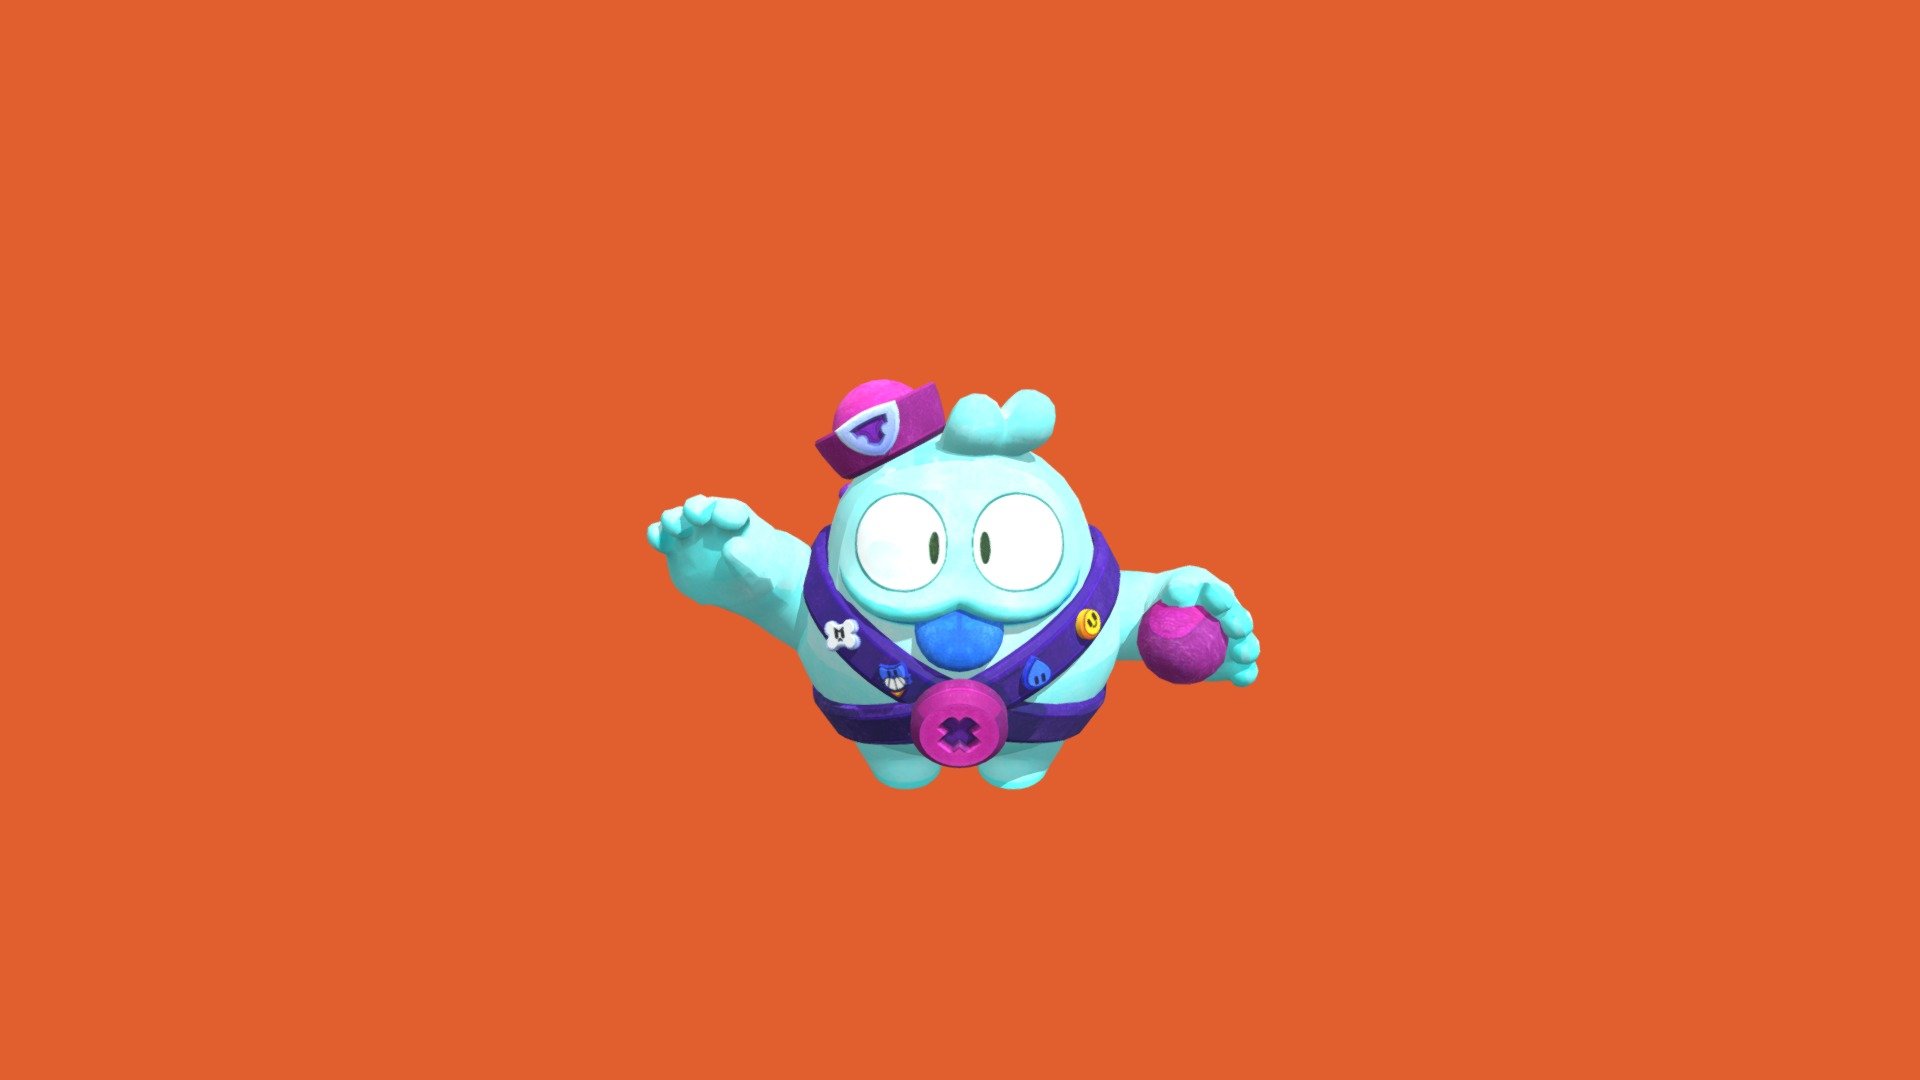 This is the Brawler Squeak of Brawl Stars. I put the textures in a cartoon style and gave him even more live. Made it in blender, hope you like it.
The original model and textures are by https://sketchfab.com/pixelKat you can see the model here:
https://sketchfab.com/3d-models/squeak-brawl-stars-89c7345b3a7841d2a361f900ecc9986f

Other of my Brawl Stars skins and charakters here:

https://sketchfab.com/3d-models/wasp-bea-brawl-stars-d638d7682bf648749b4cb1833420cb74

https://sketchfab.com/3d-models/posed-squeak-old-style-brawl-stars-6bfea08a41ce4e98b9710e7e79a8e0e3 - Posed Squeak Cartoon Style Brawl Stars - Download Free 3D model by Onilak24 (@Onilak) 3d model